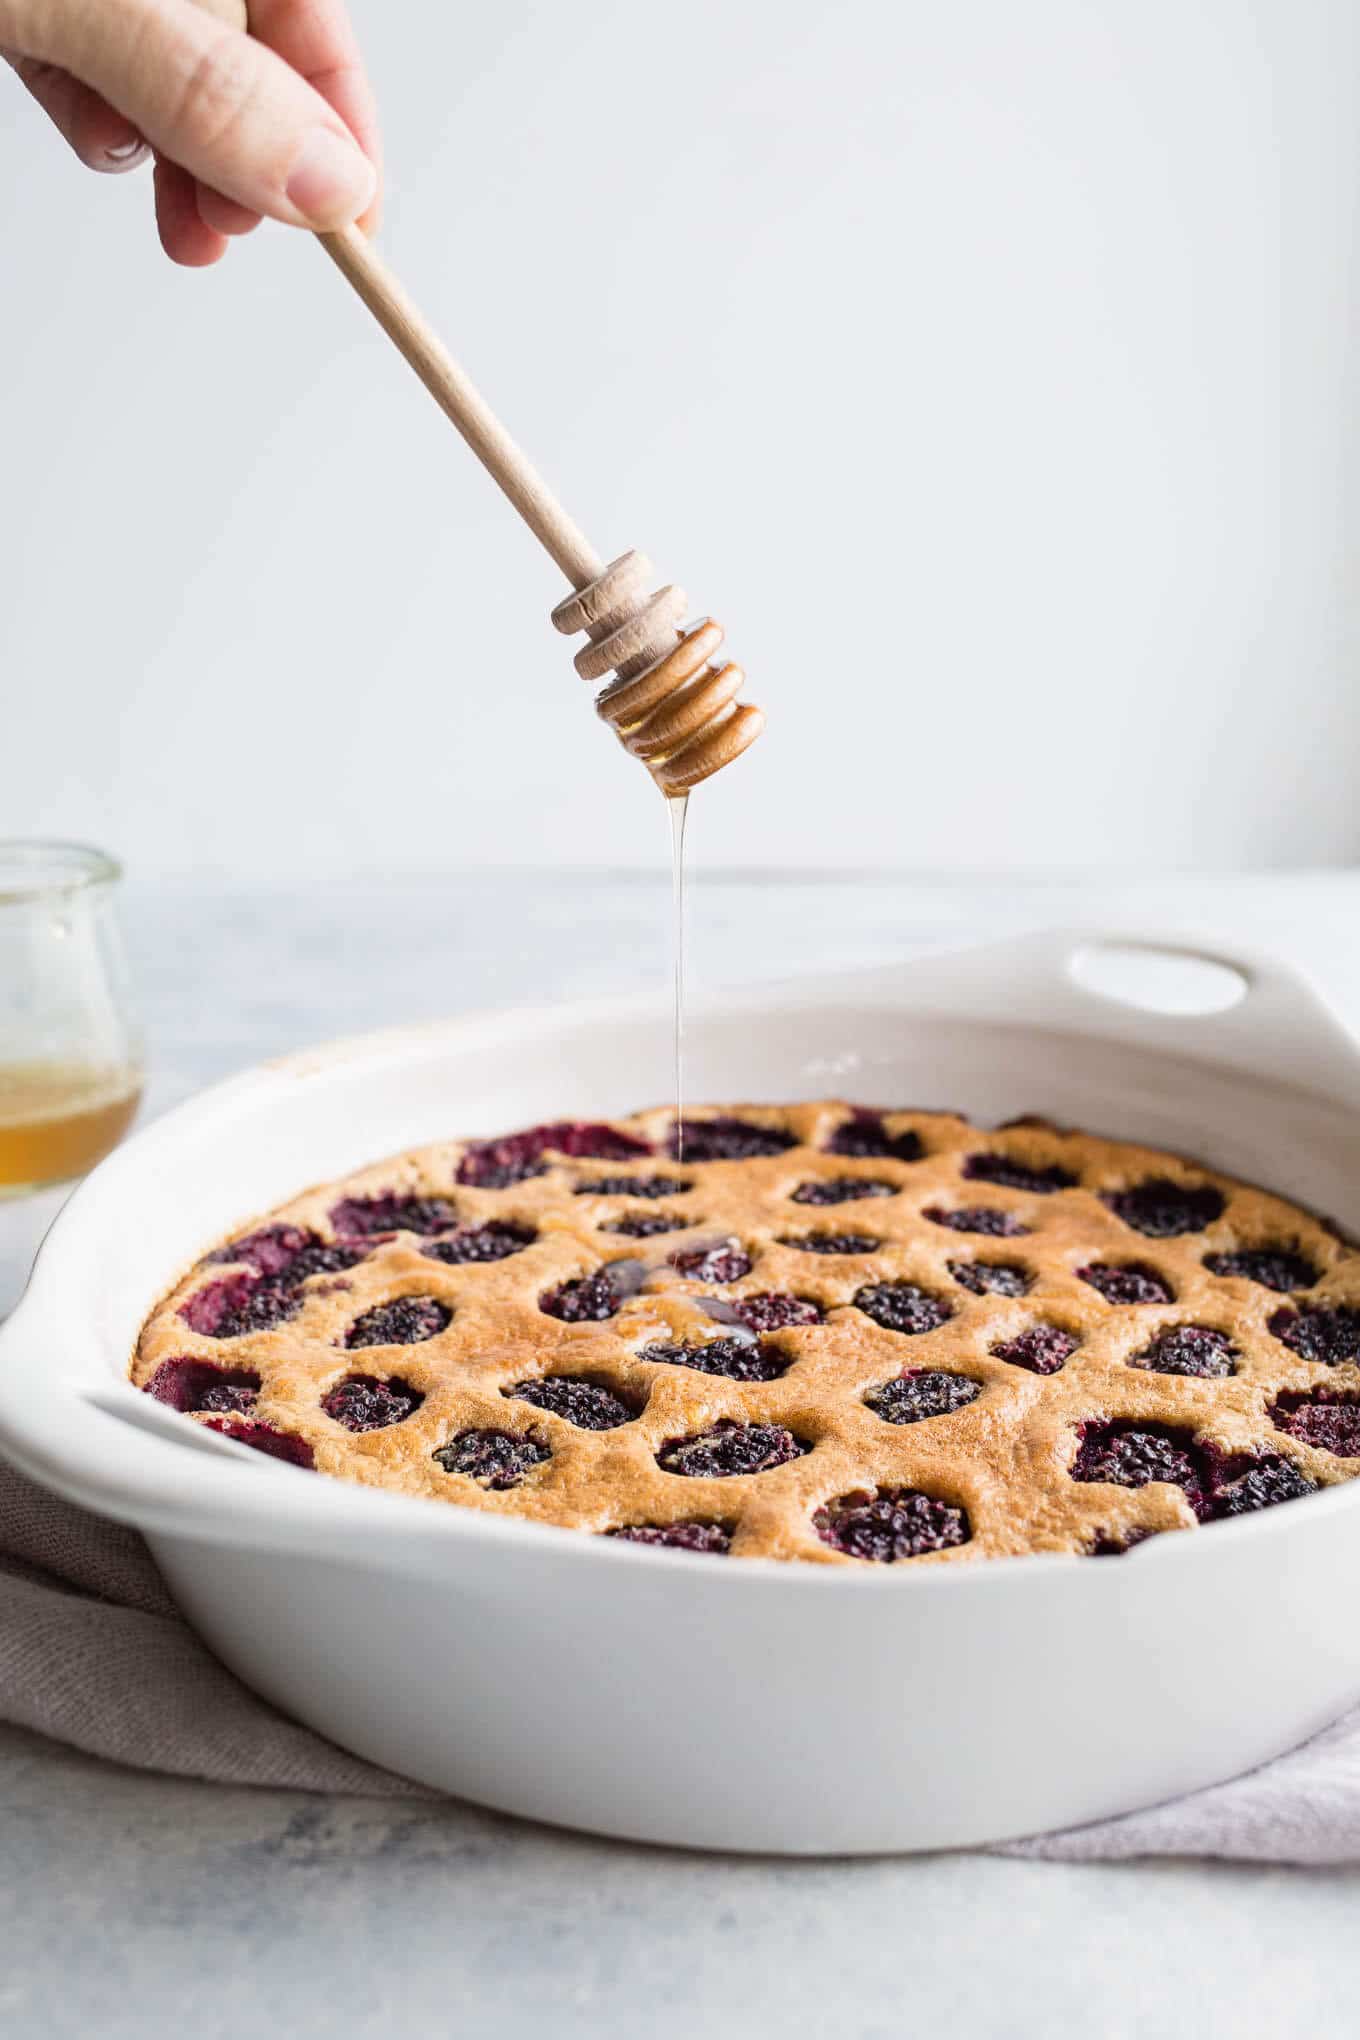 This Blackberry Honey Clafoutis is made with gluten-free almond flour and oat flour and whipped together for ease in a blender. Drizzled with honey and loaded with blackberries, it is a clafoutis recipe you don't want to miss.